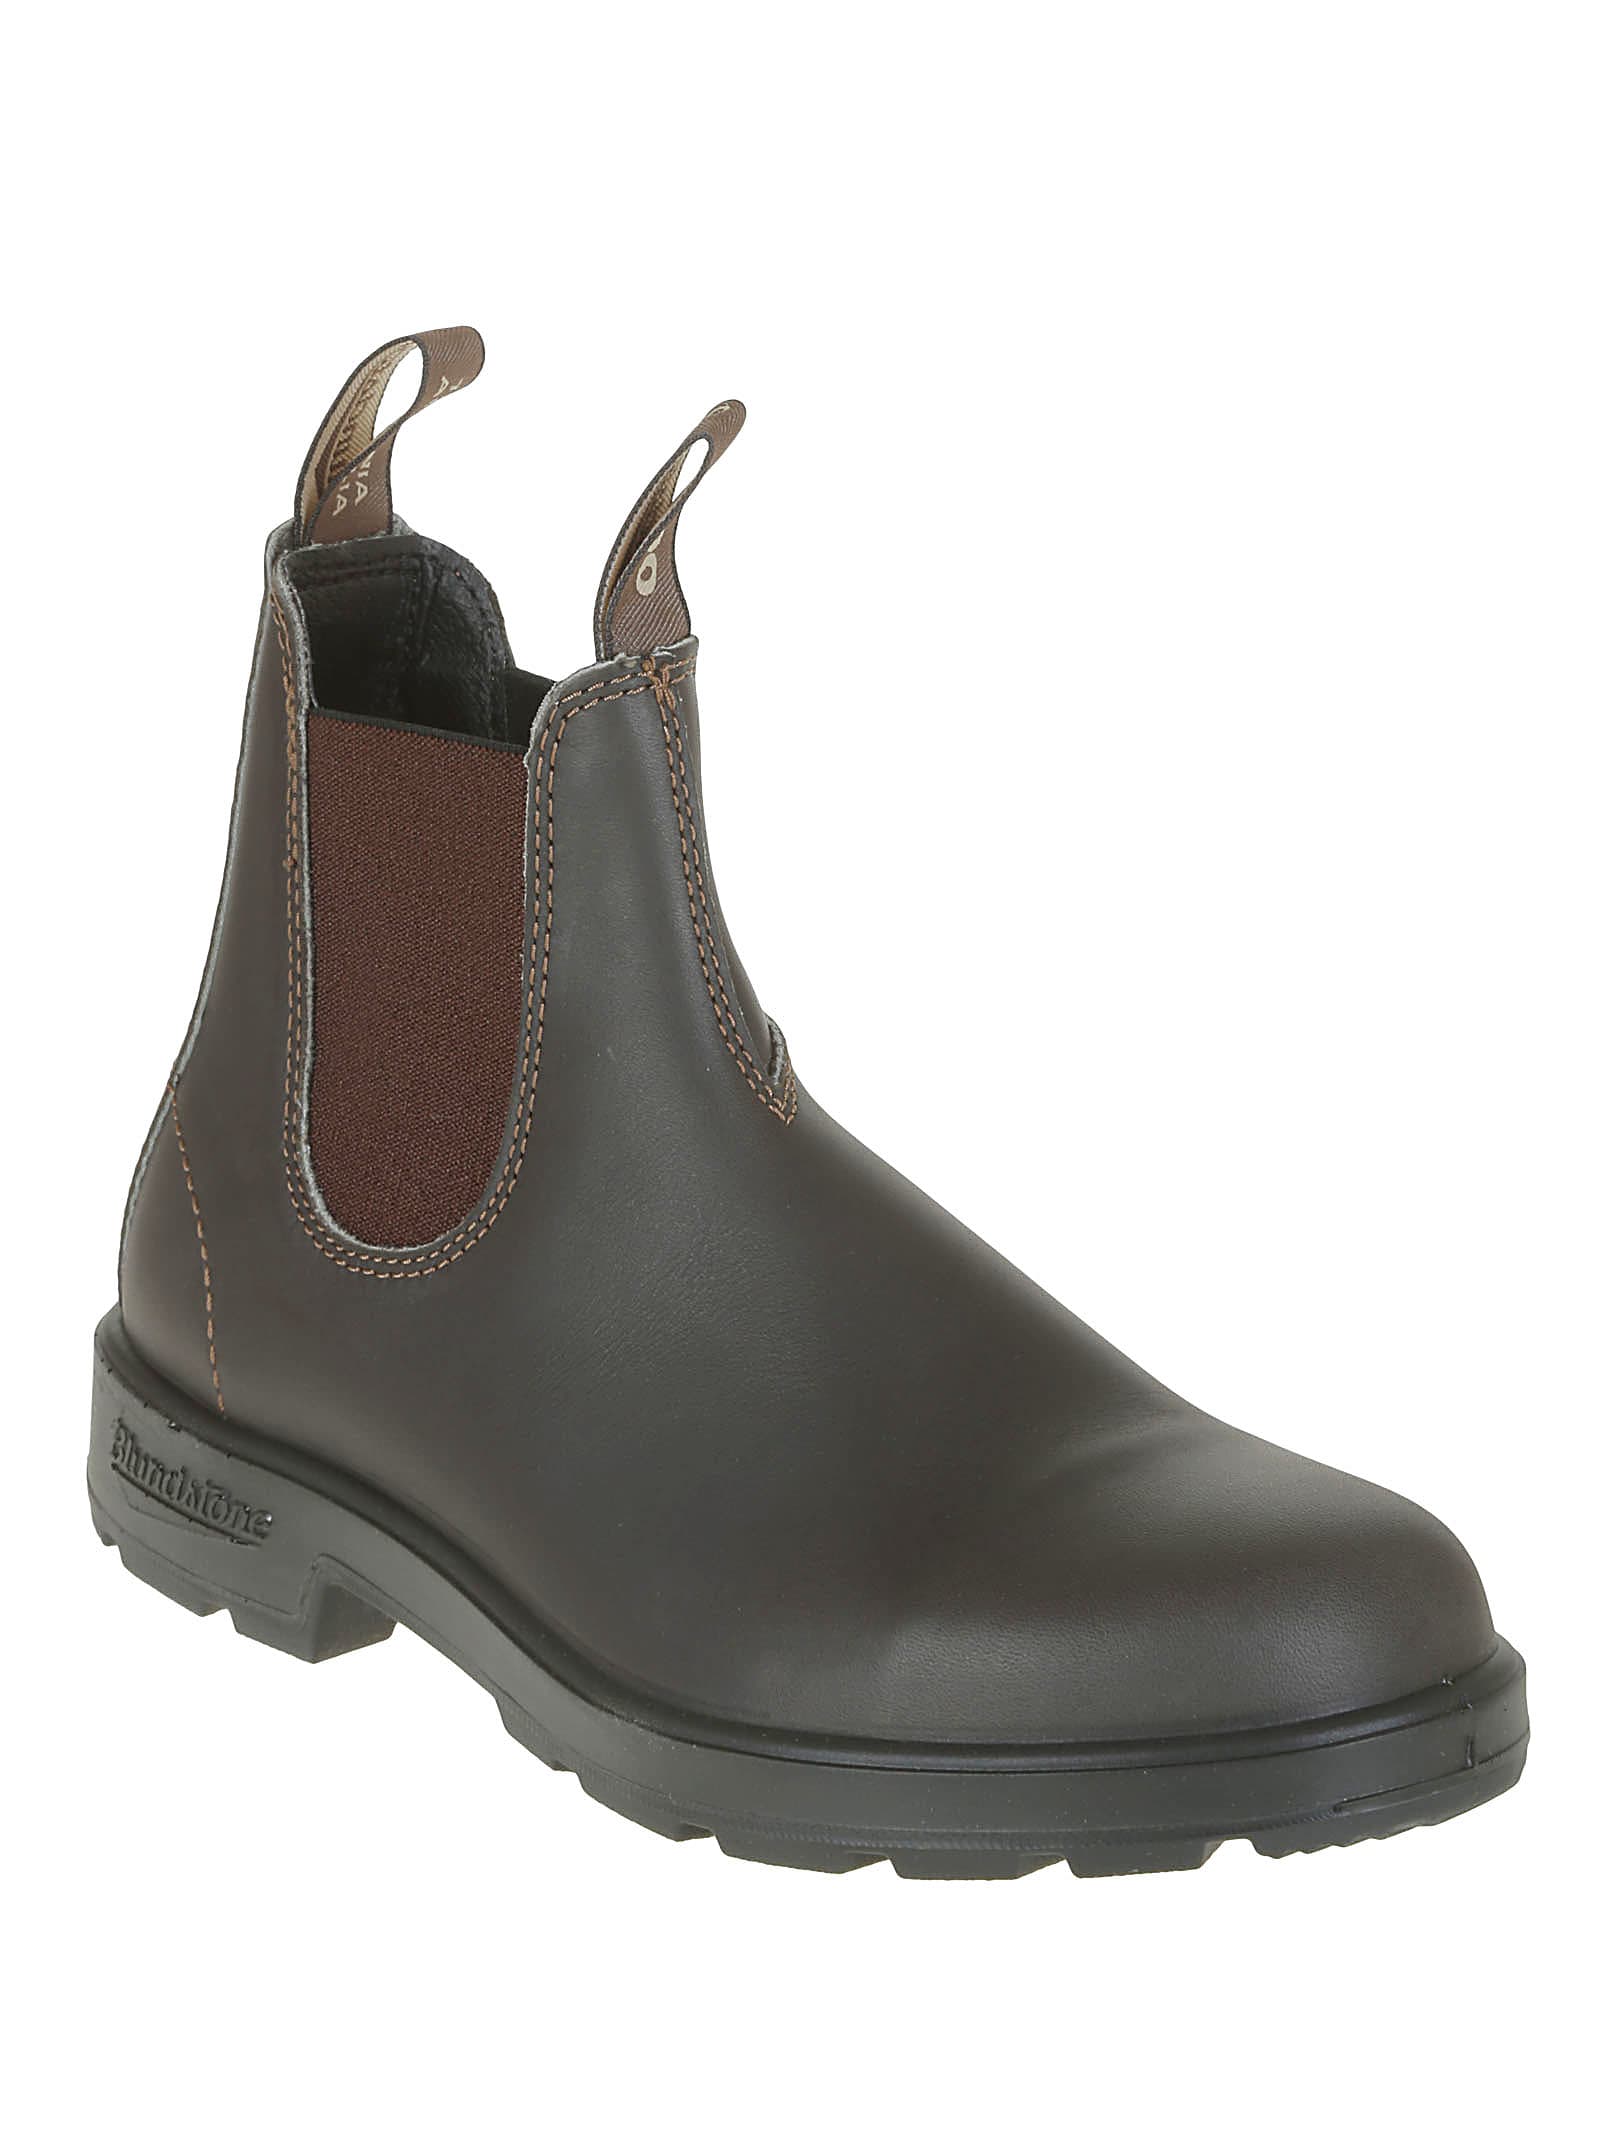 Shop Blundstone 500 Stout Brown Leather In Stout Brown & Brown